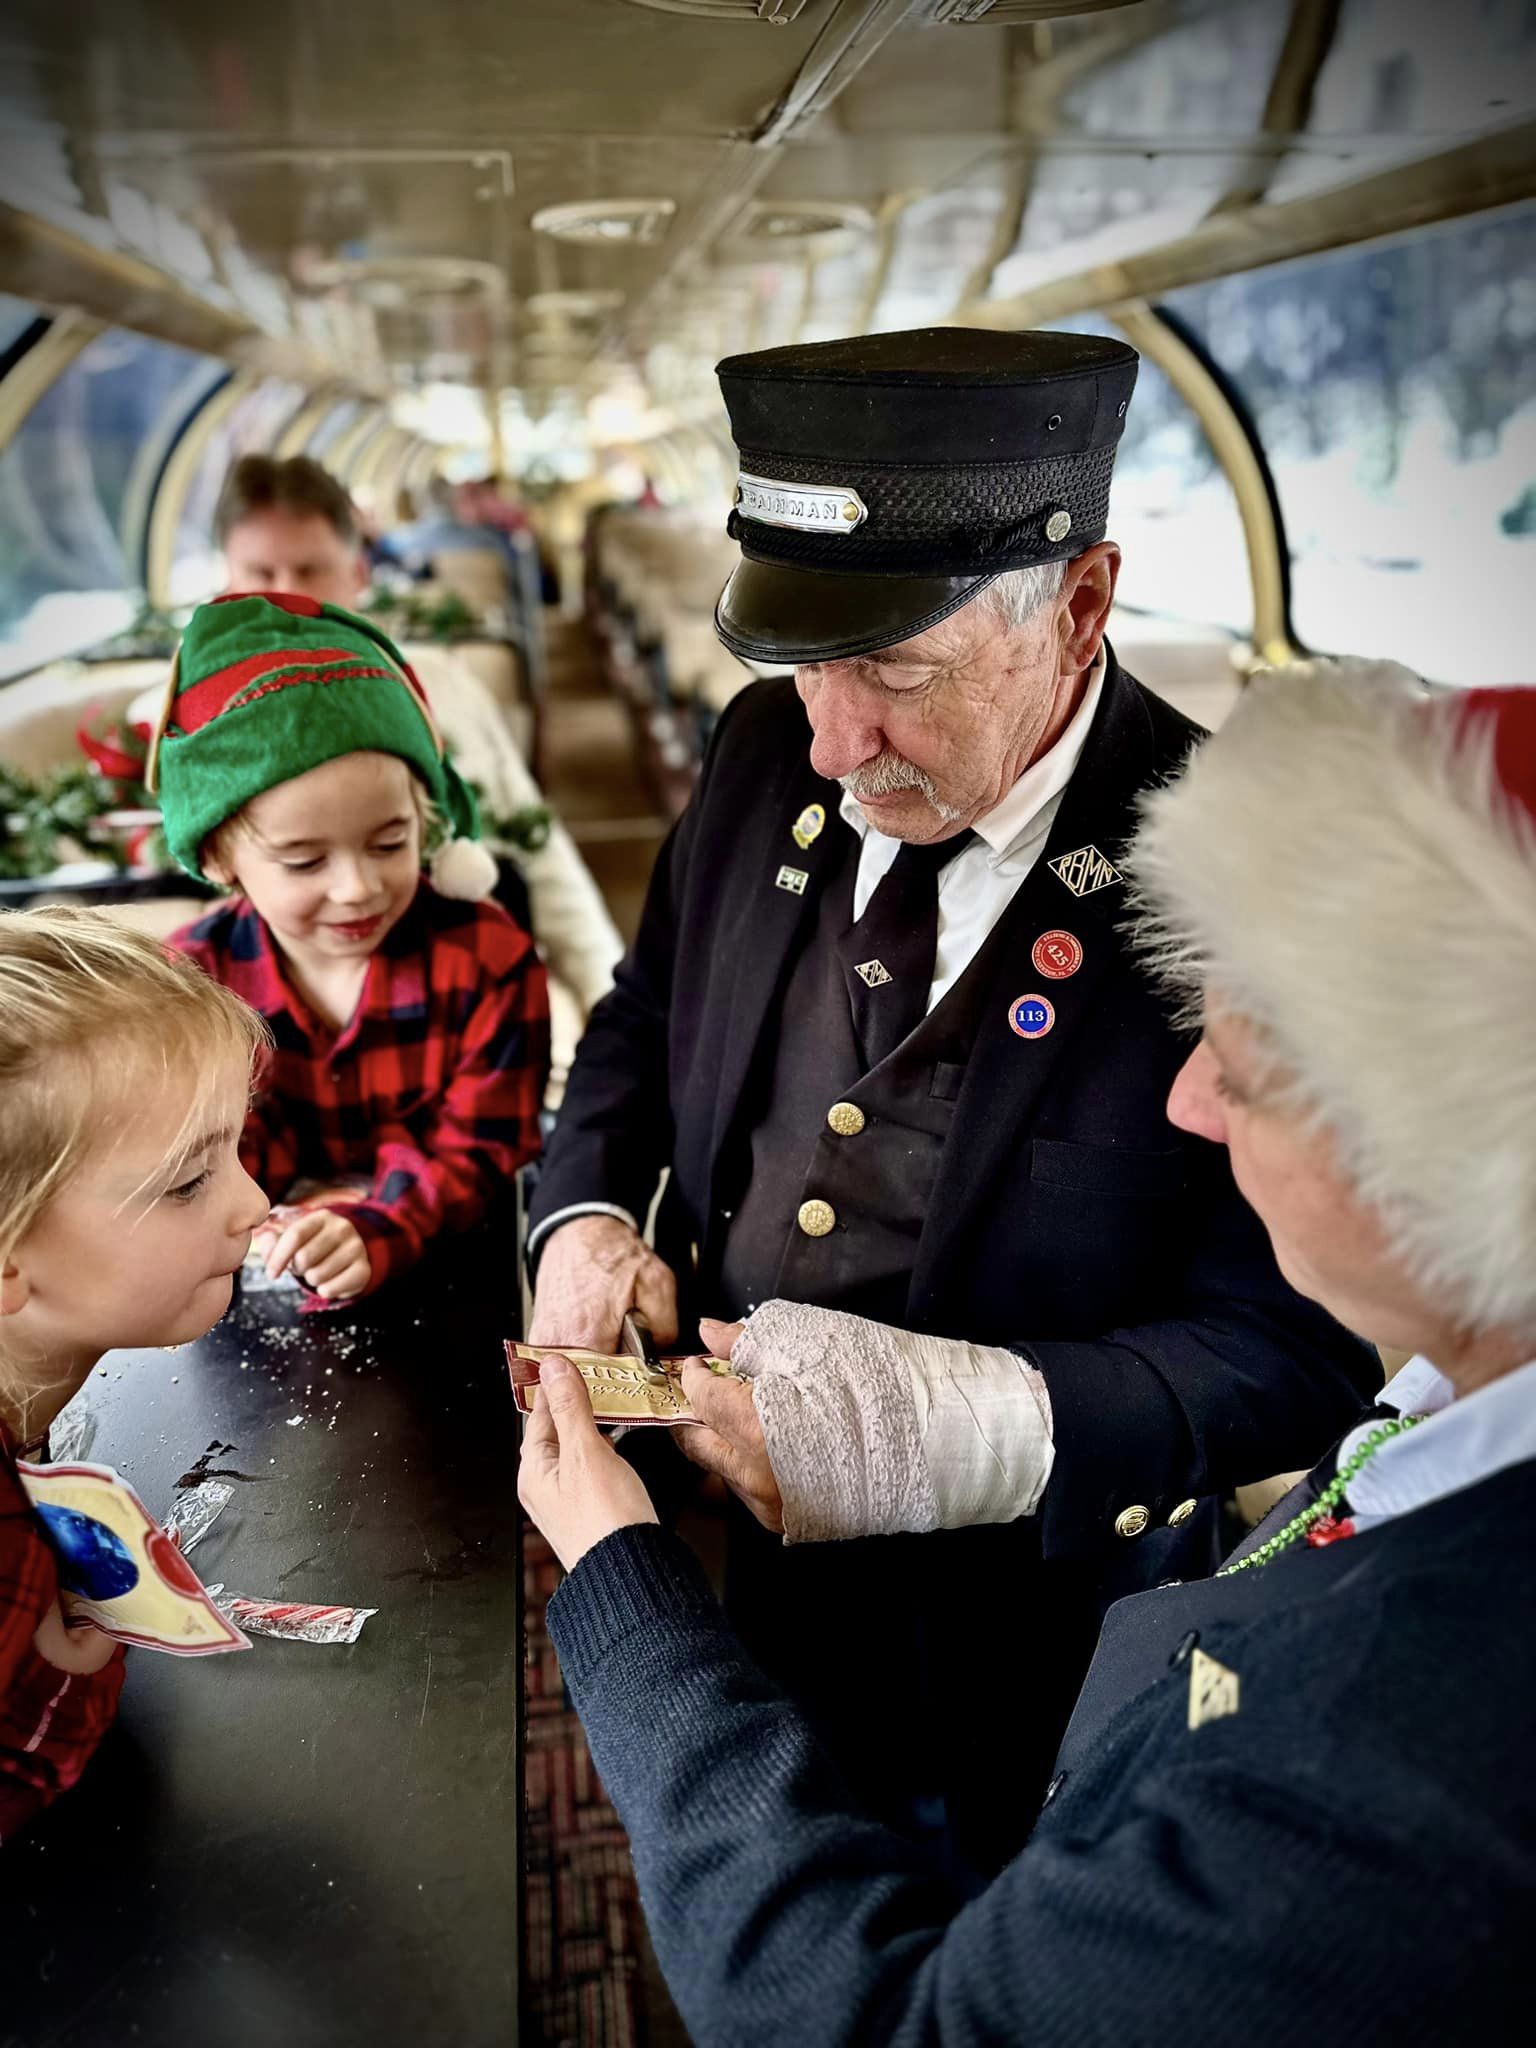 Ticket taker on train ride with kids.